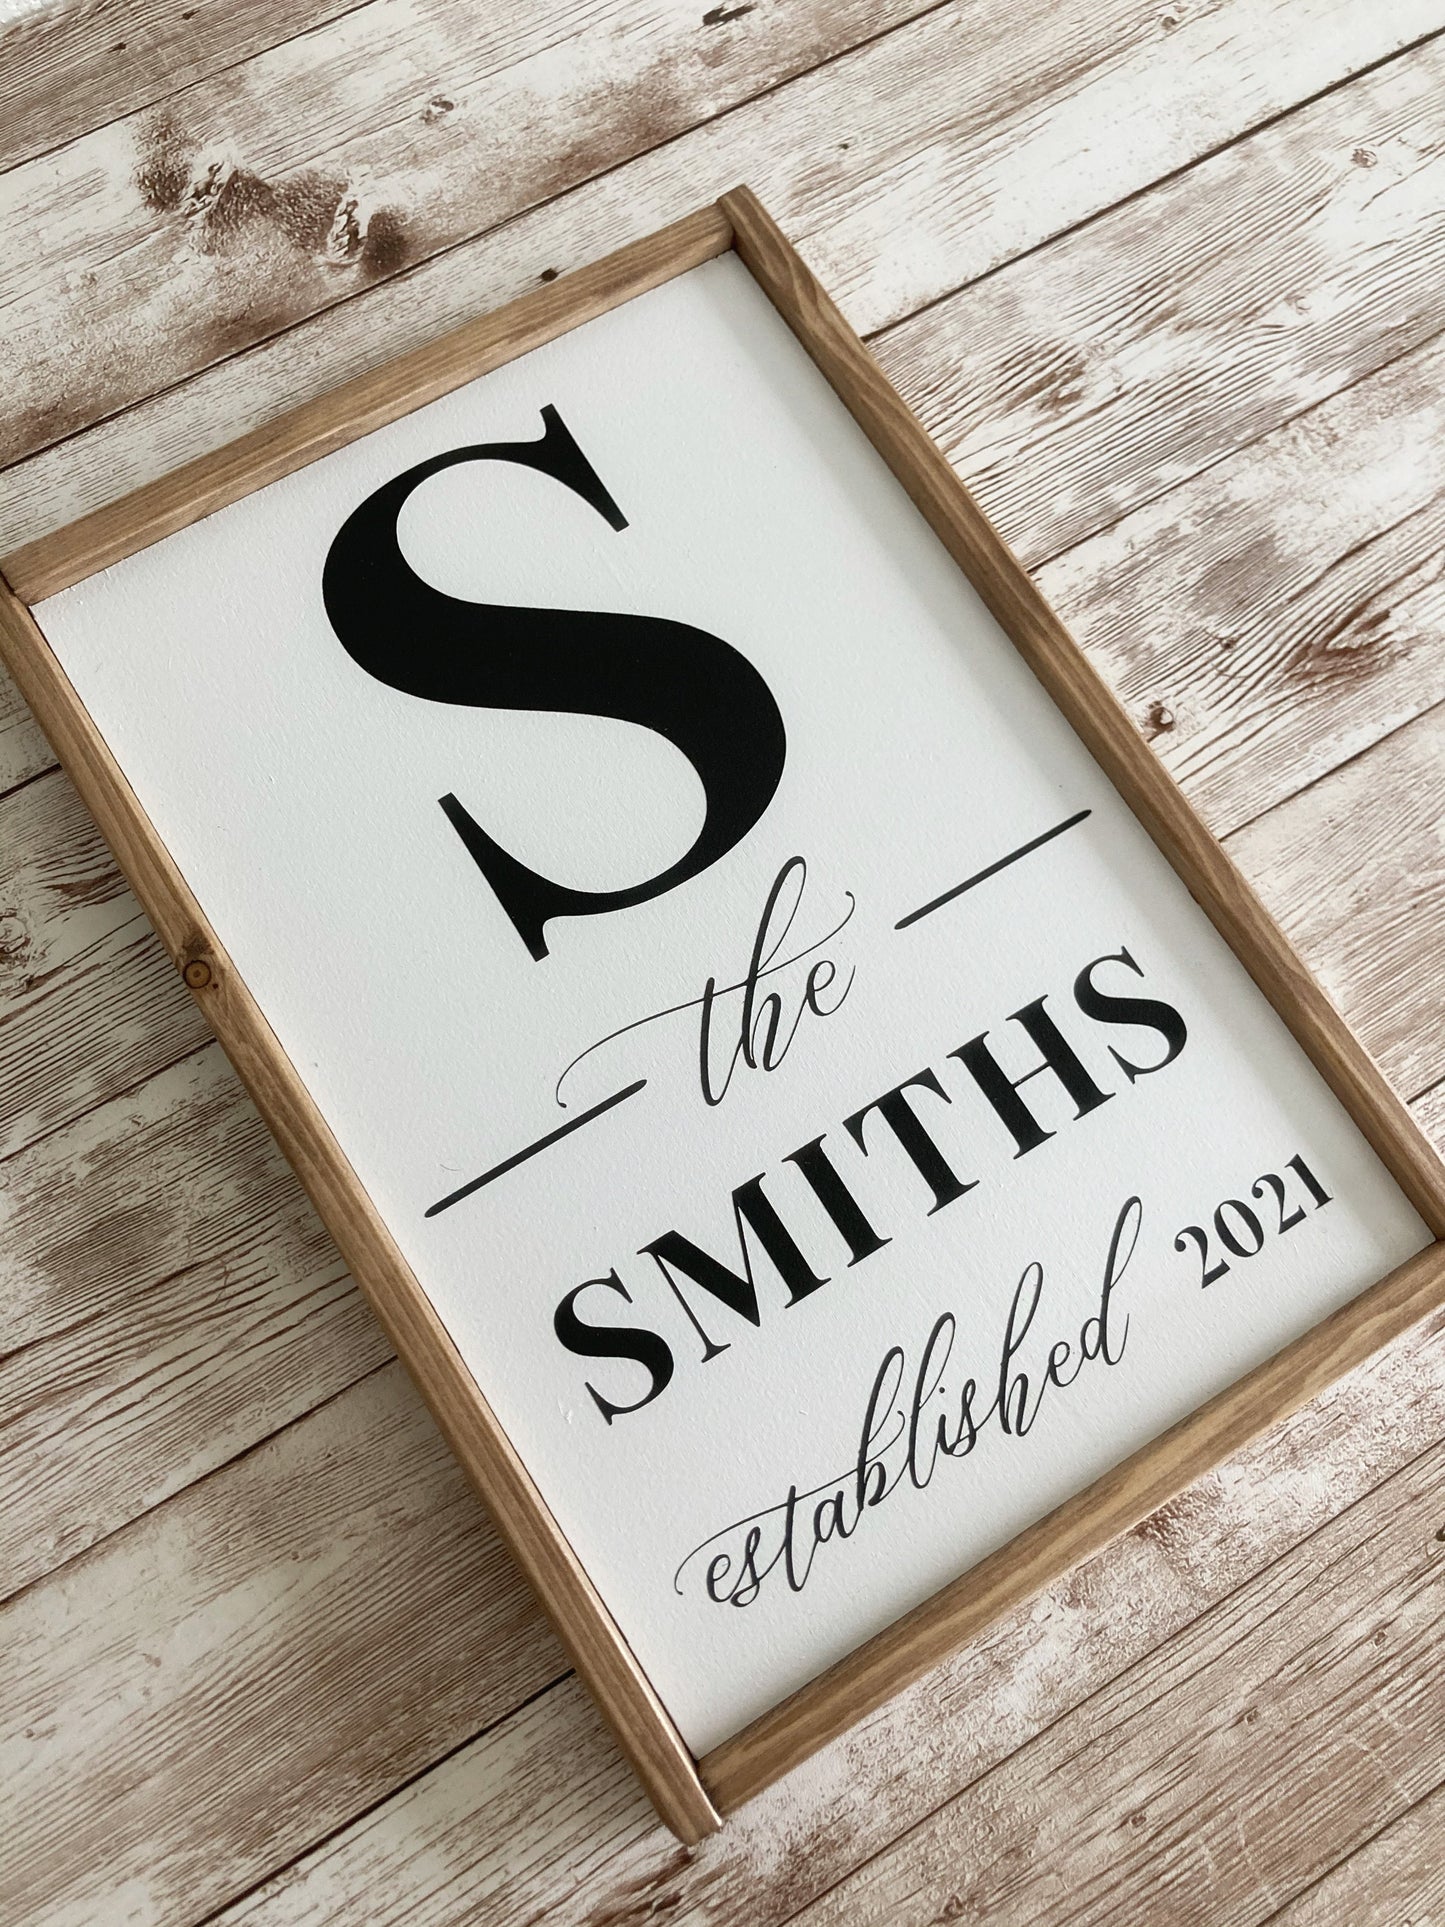 Personalized Monogrammed Wedding or Anniversary Wood Sign